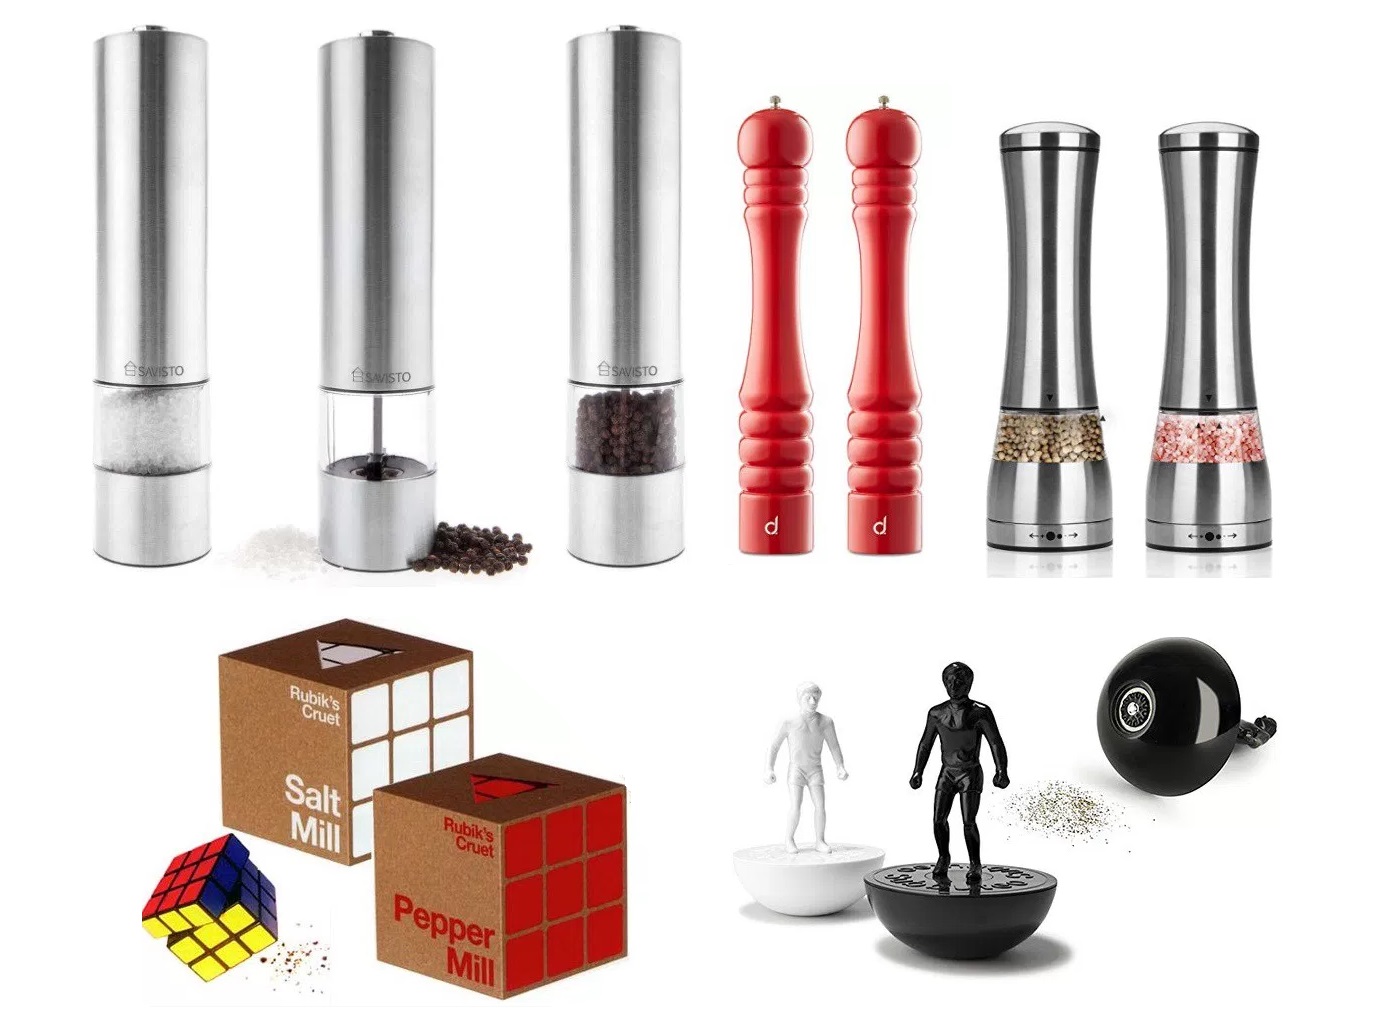 Top 10 Amazing, Novelty and Unusual Salt & Pepper Mill Grinders